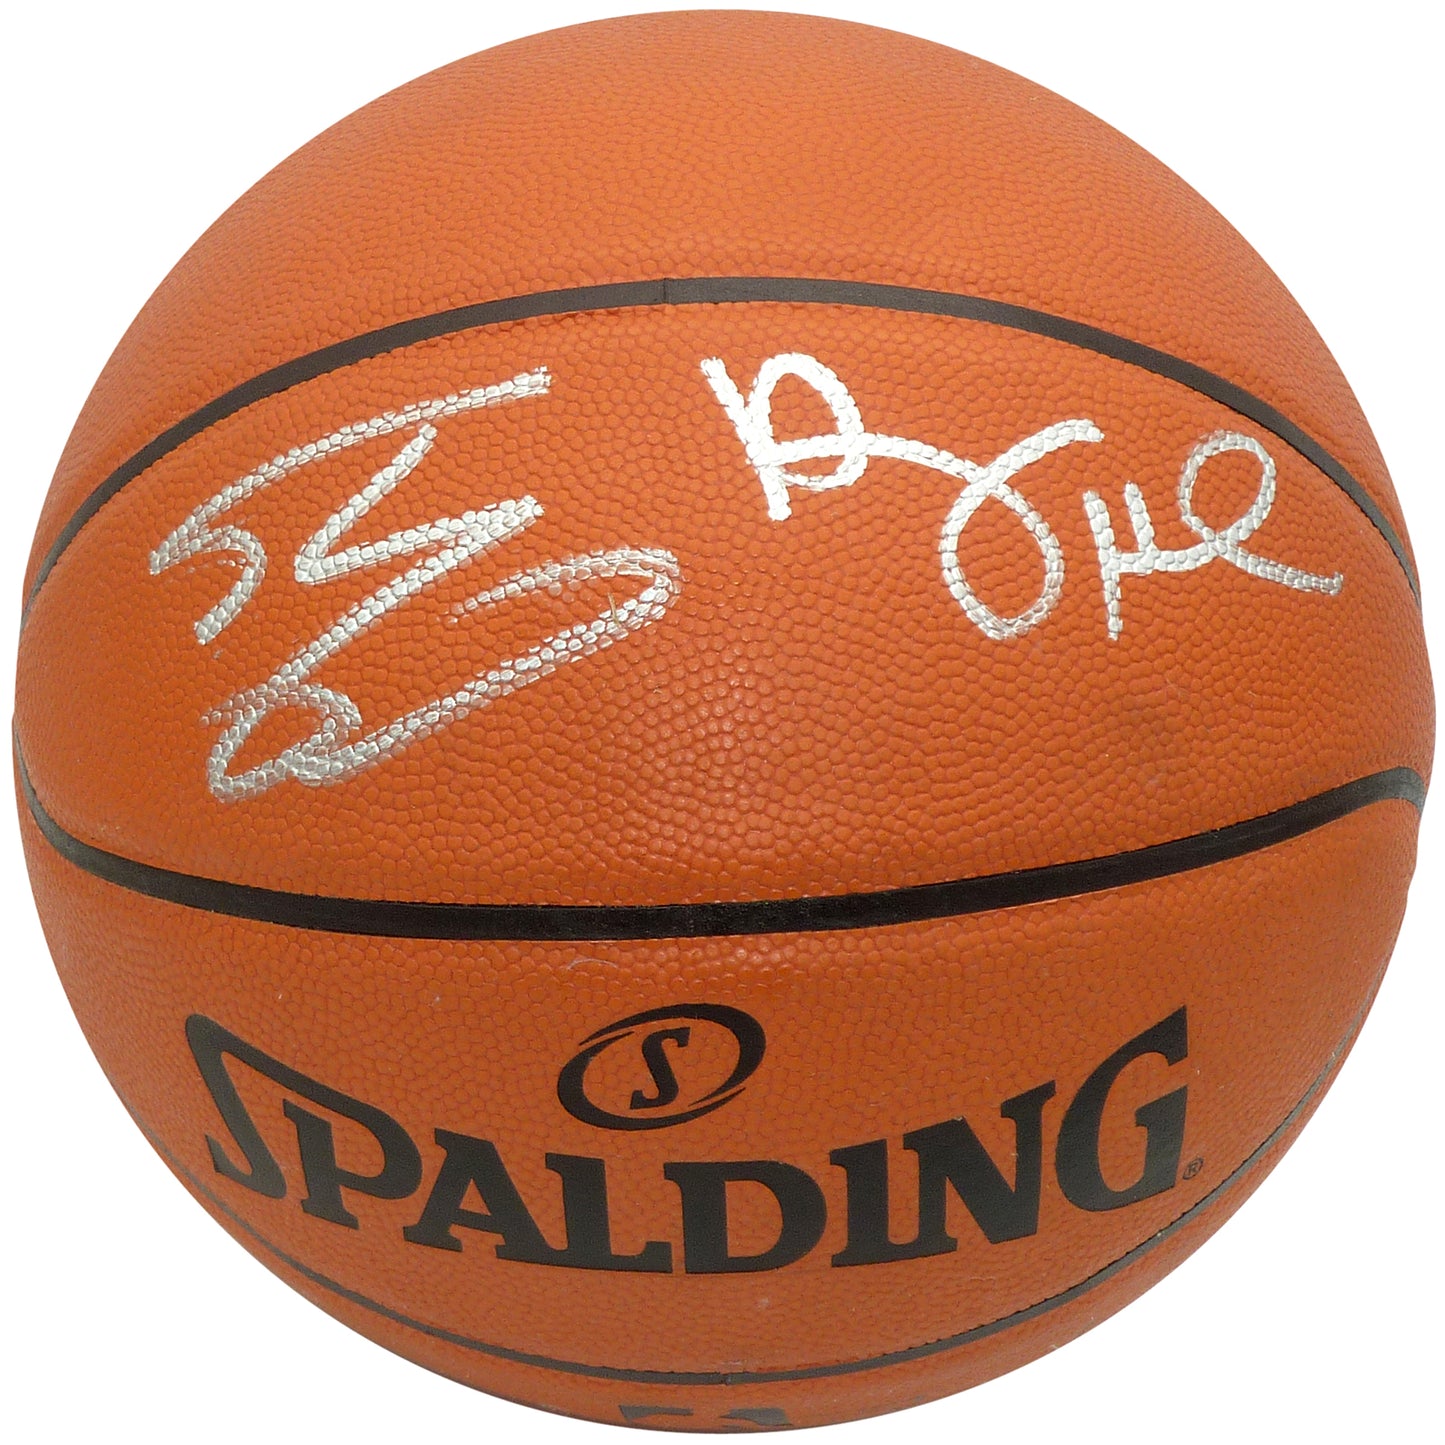 Shaquille O'Neal And Anfernee "Penny" Hardaway Autographed NBA Basketball - Beckett